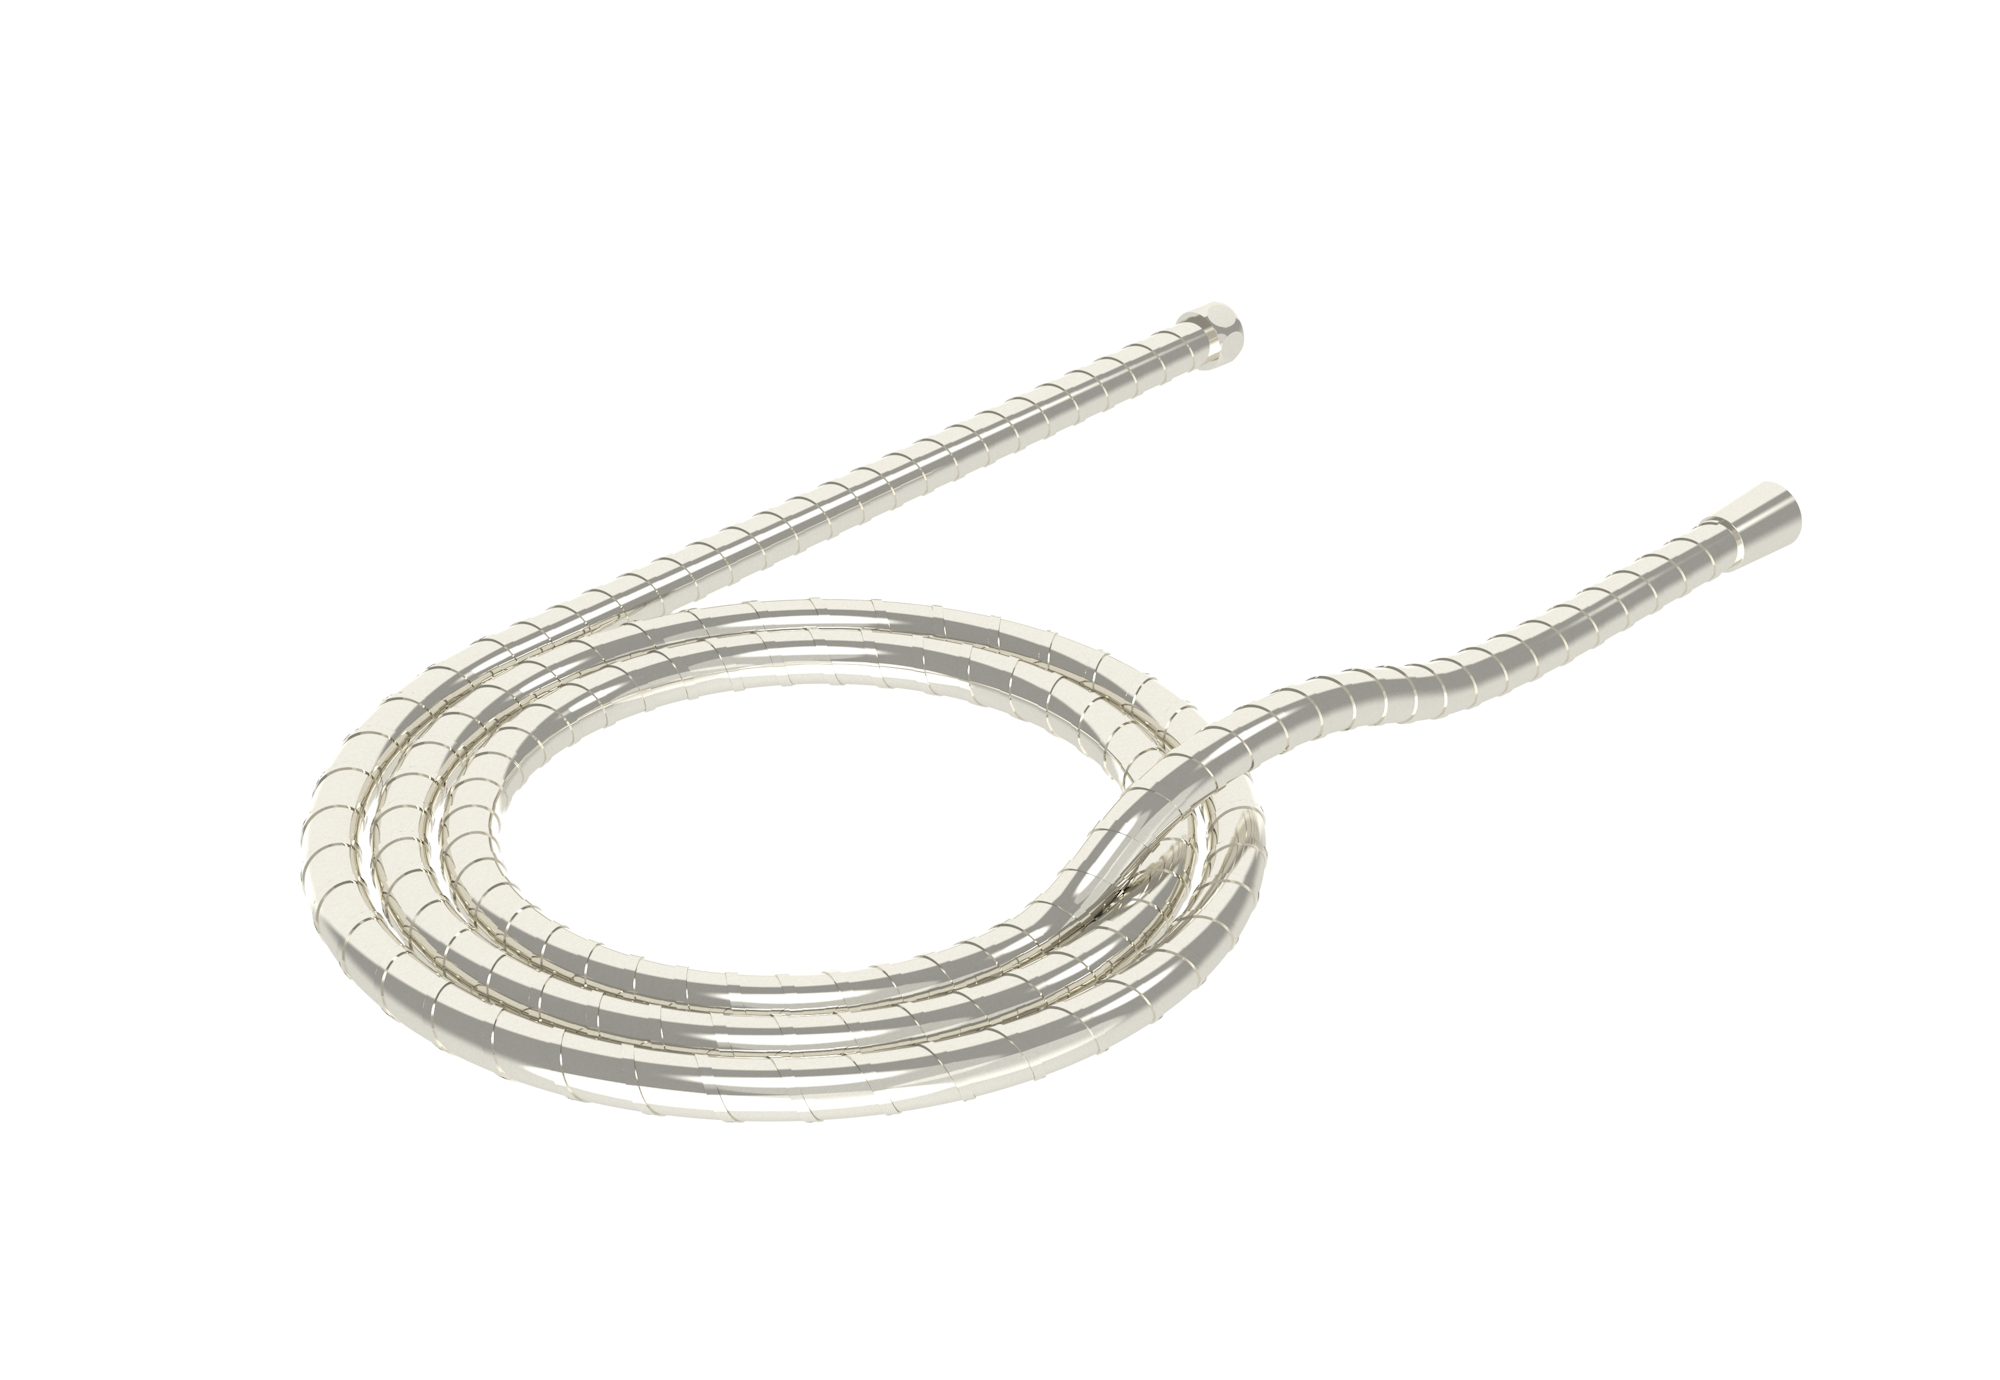 1.8m stainless steel shower hose - Brushed Nickel (PVD)